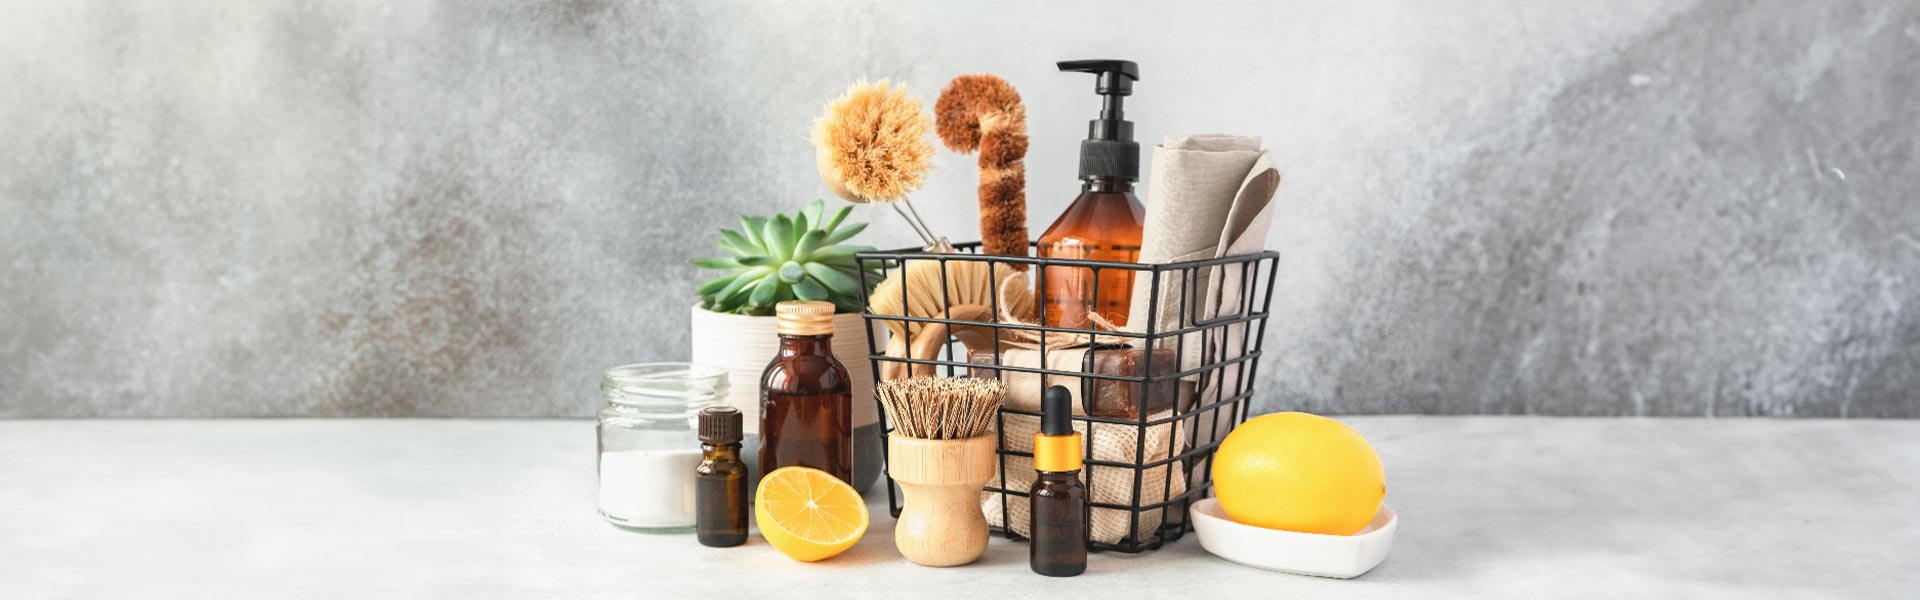 An image of organic and natural cleaning supplies with essential oils